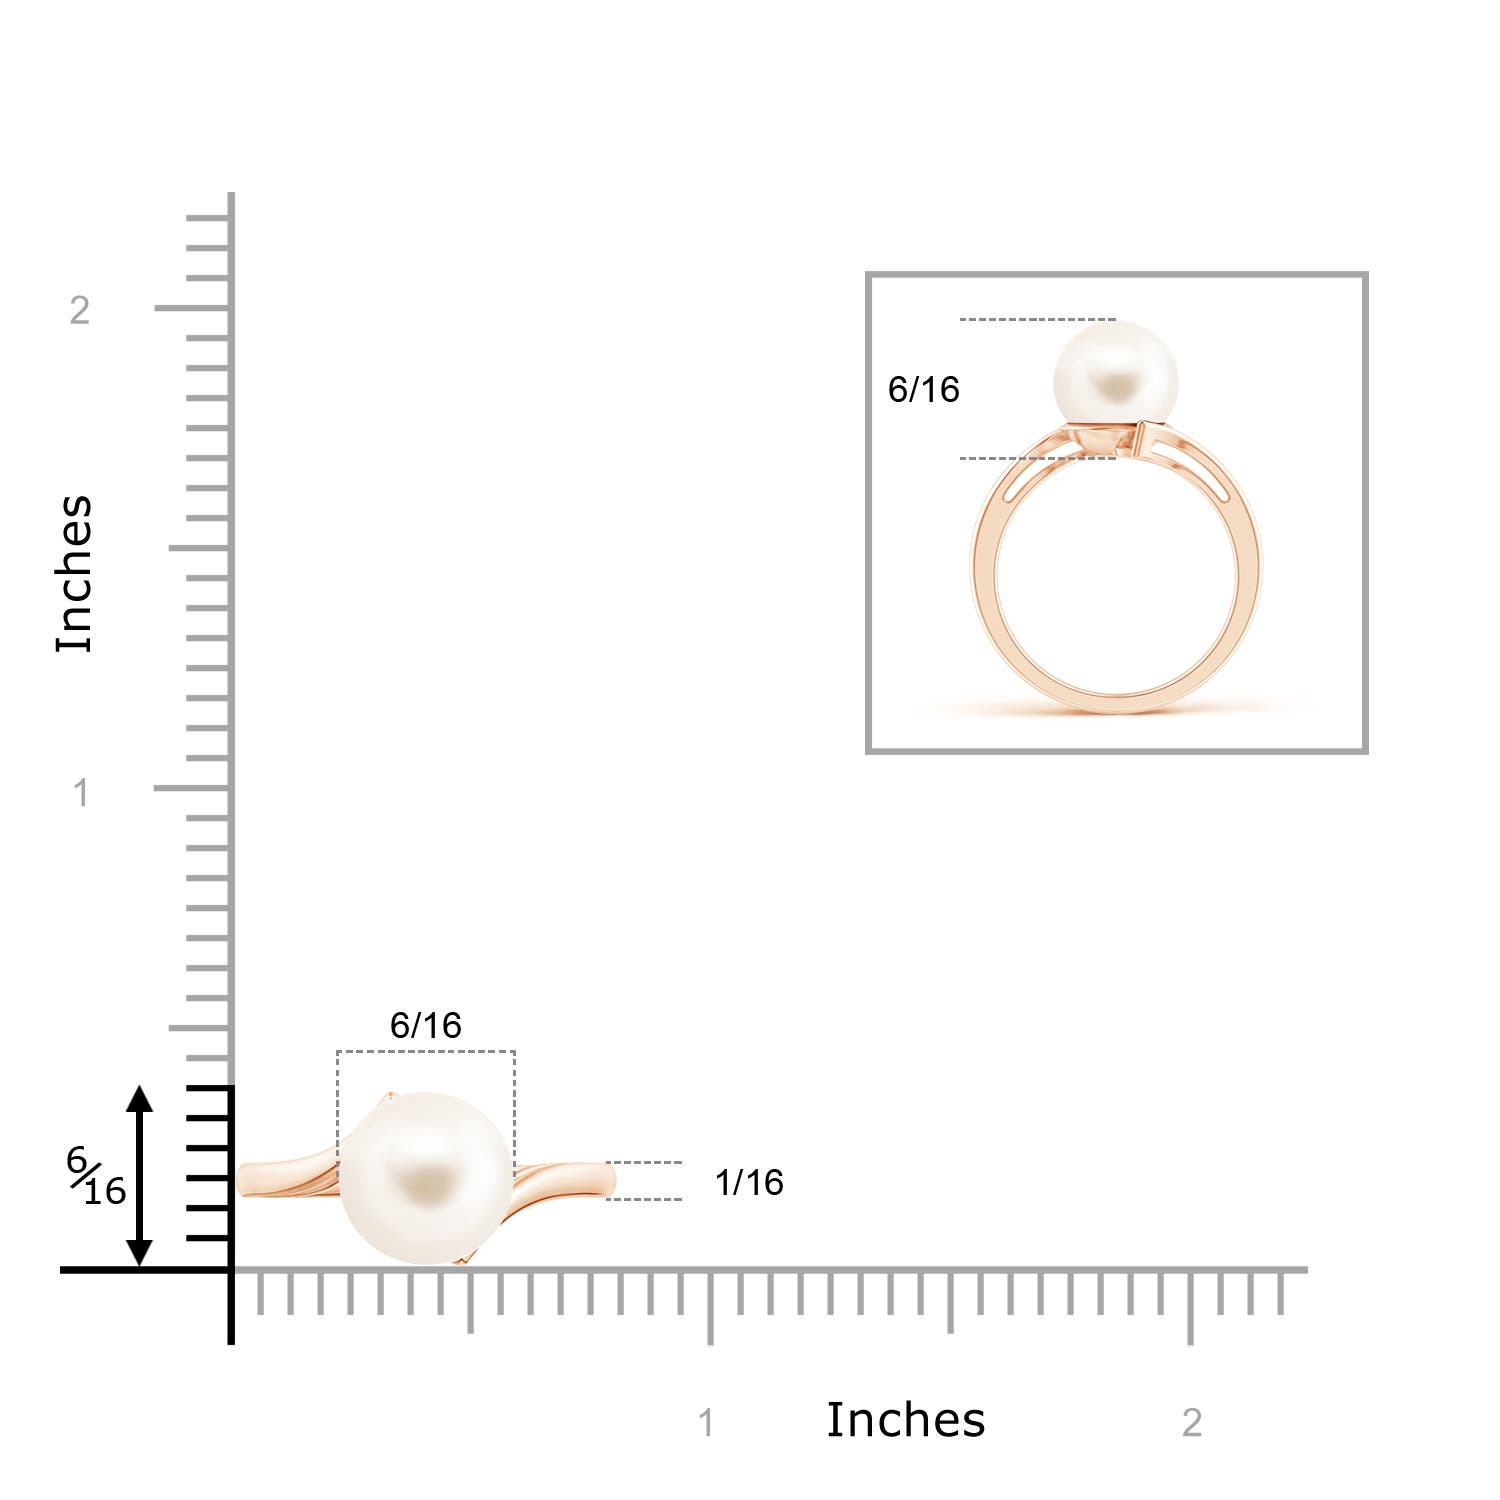 AAA / 5.25 CT / 14 KT Rose Gold